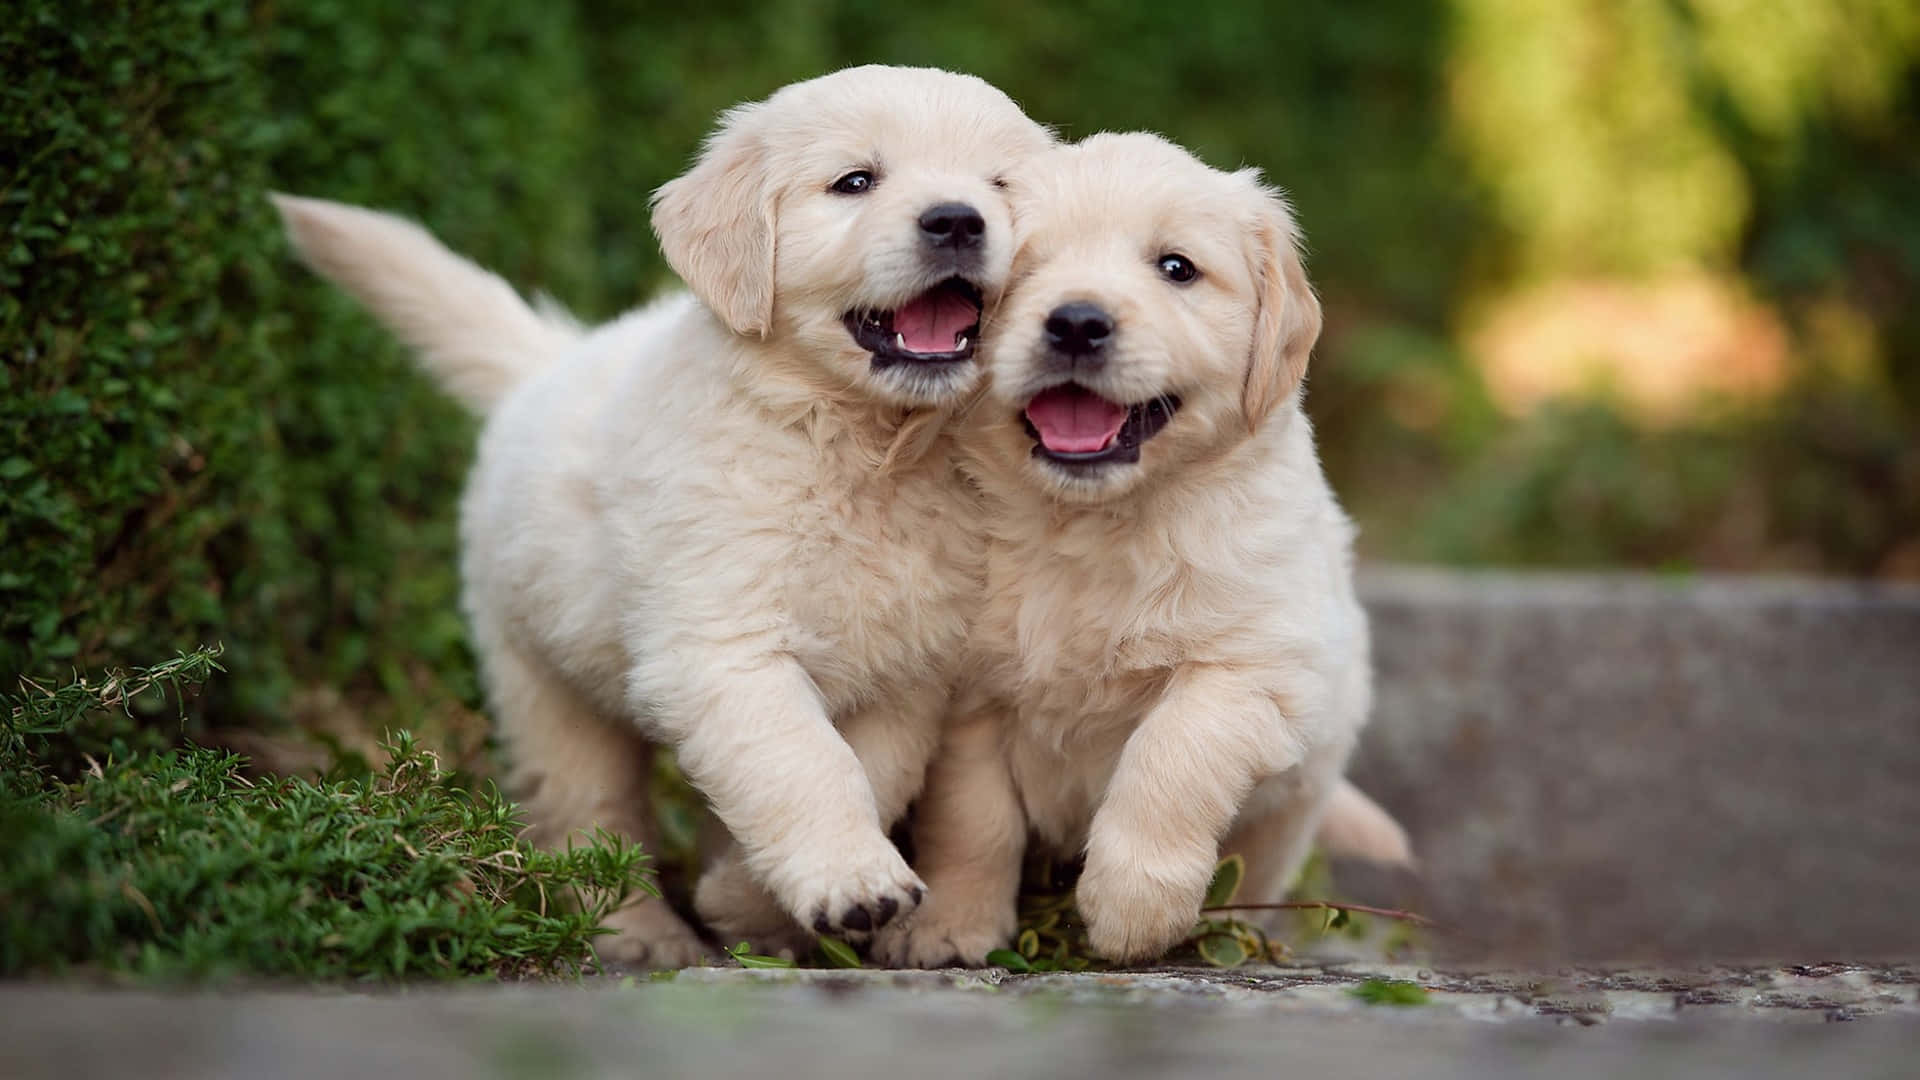 Adorable Puppies Playing Outdoors